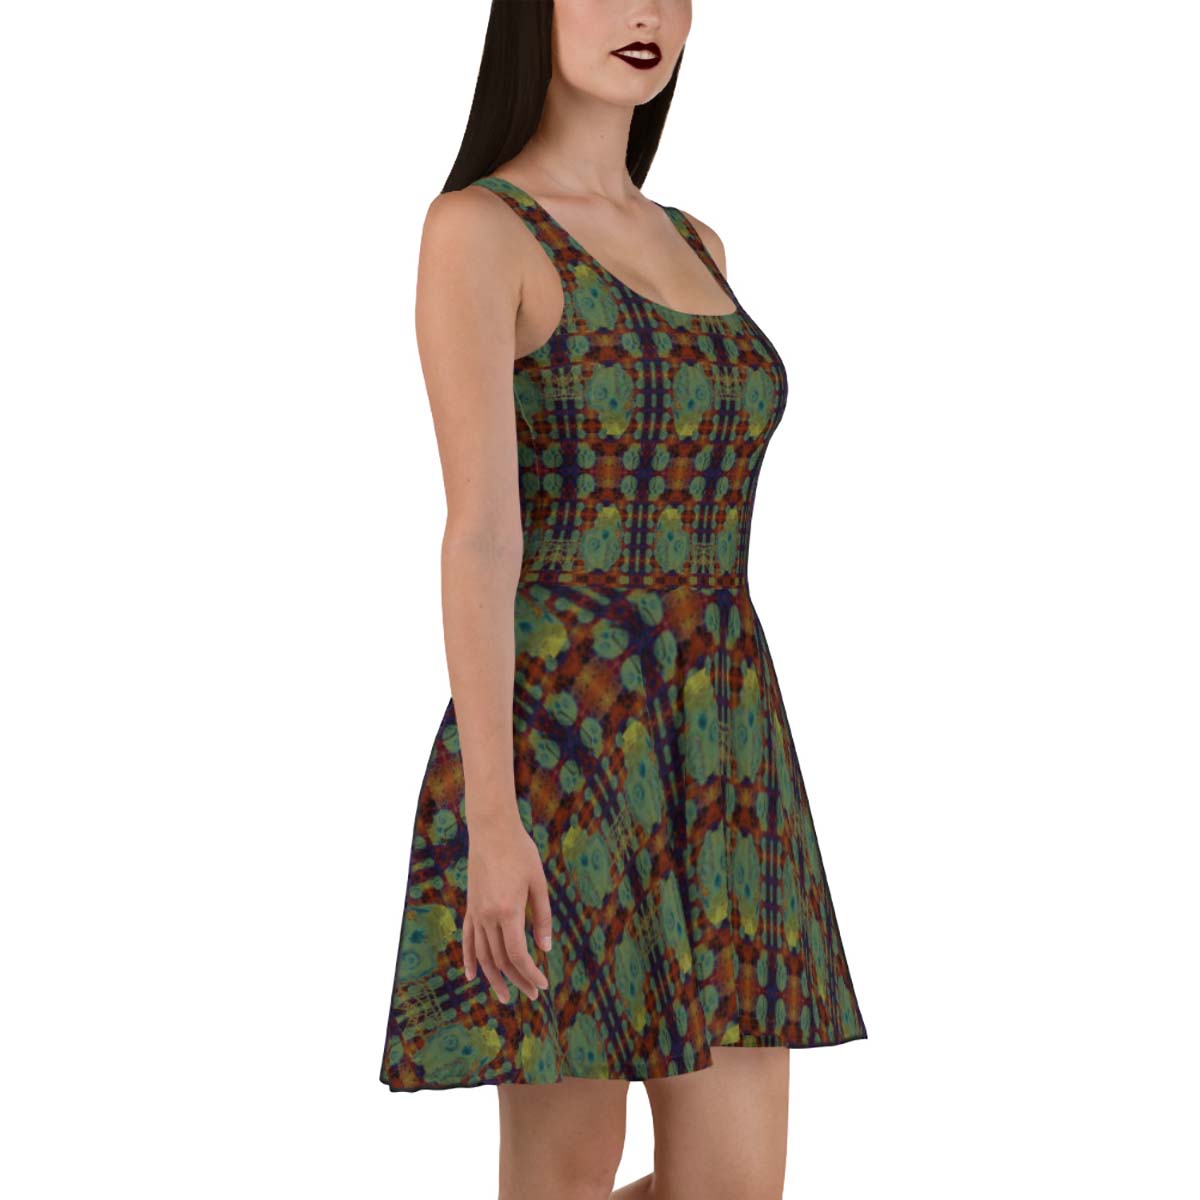 Melasdesign; Witchy Gothic Clothes Collection; skater dress; glowing skulls; punk; goth; short dress; sleeveless